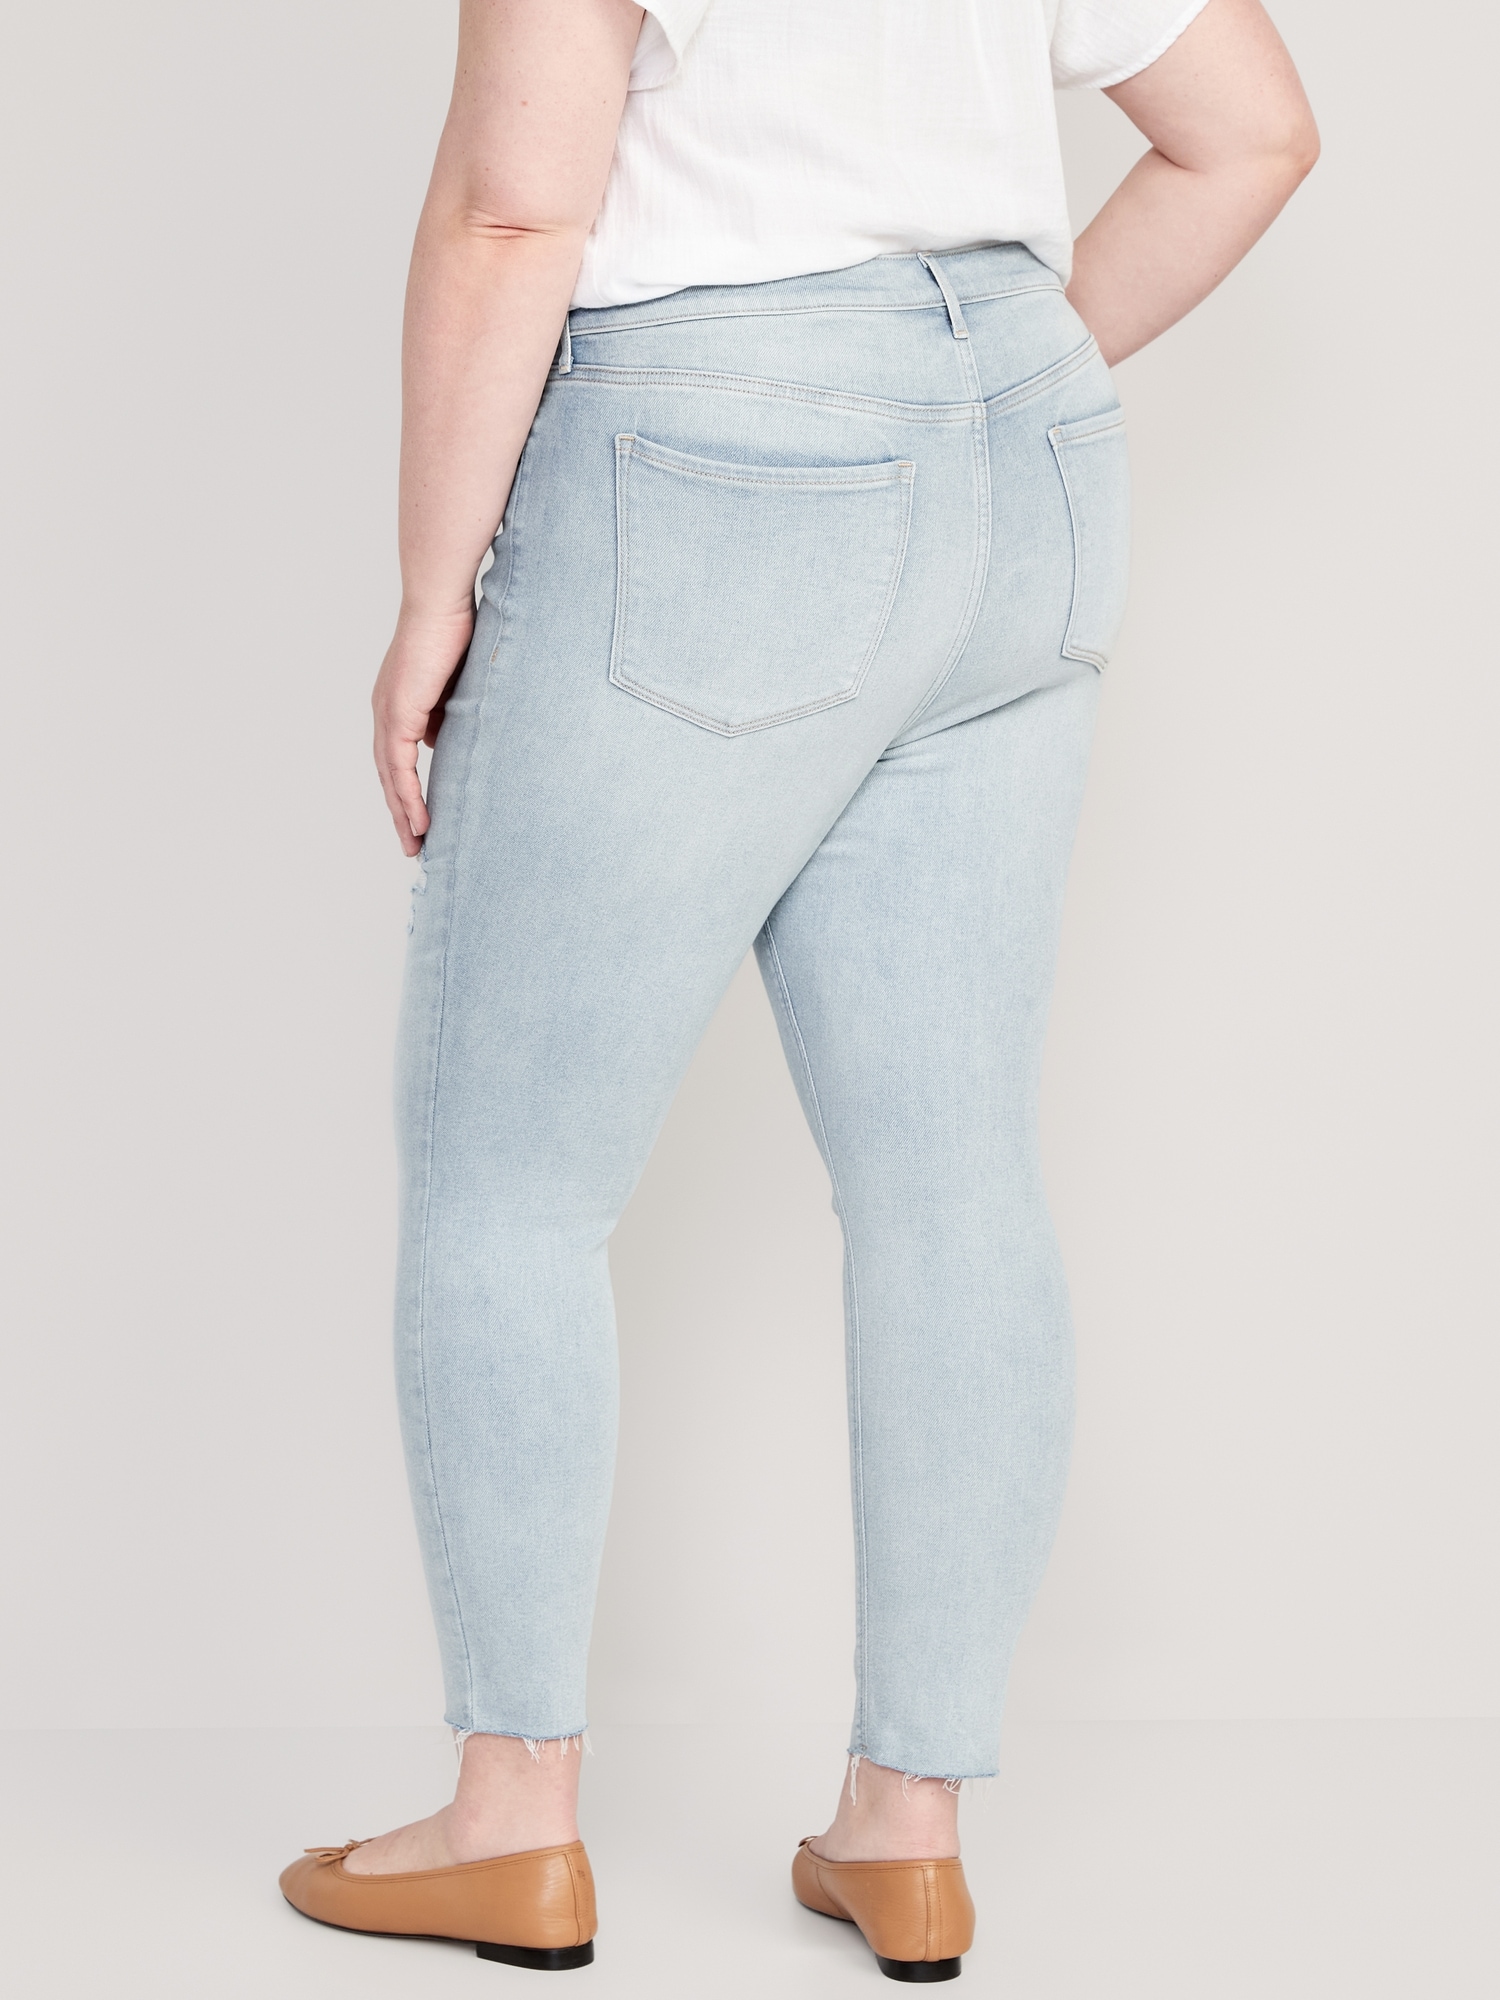 High-Waisted Rockstar Super-Skinny Distressed Ankle Jeans | Old Navy